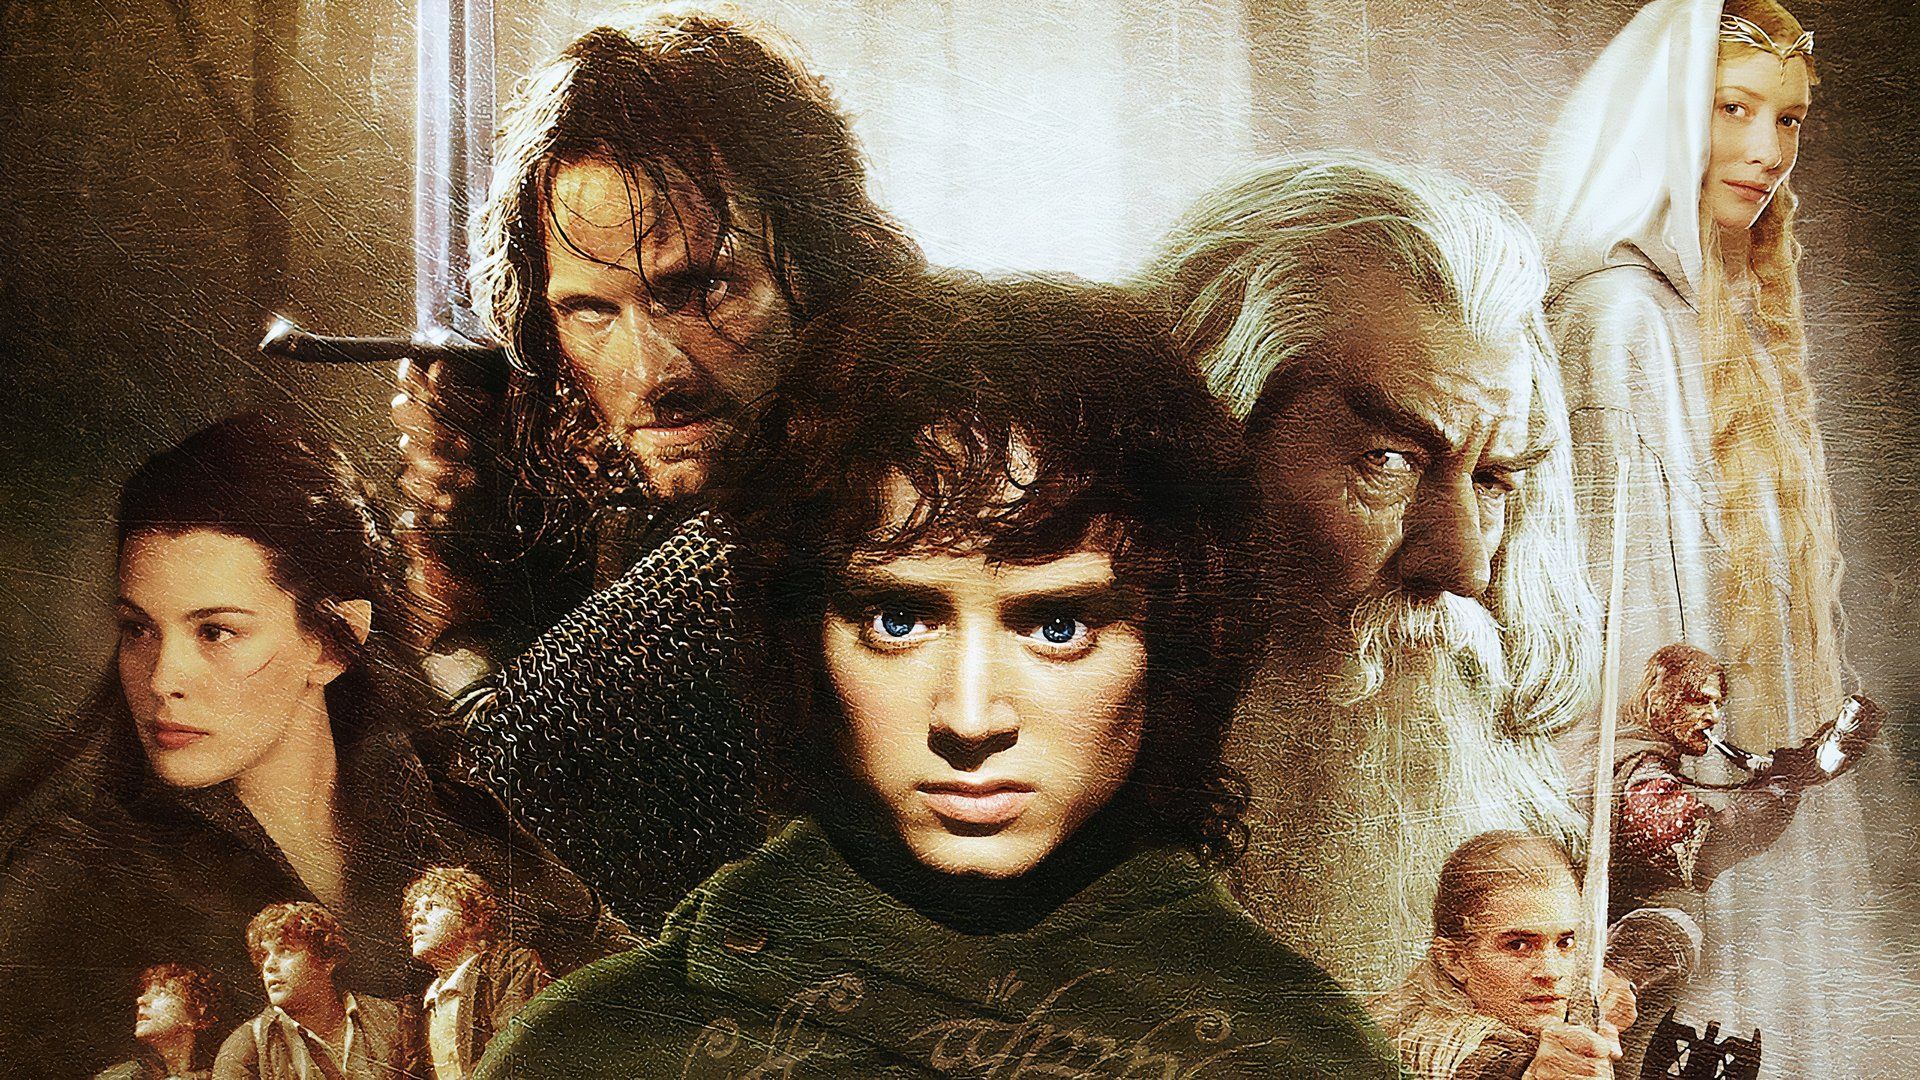 Lord of The Rings Fellowship of the Ring poster cropped